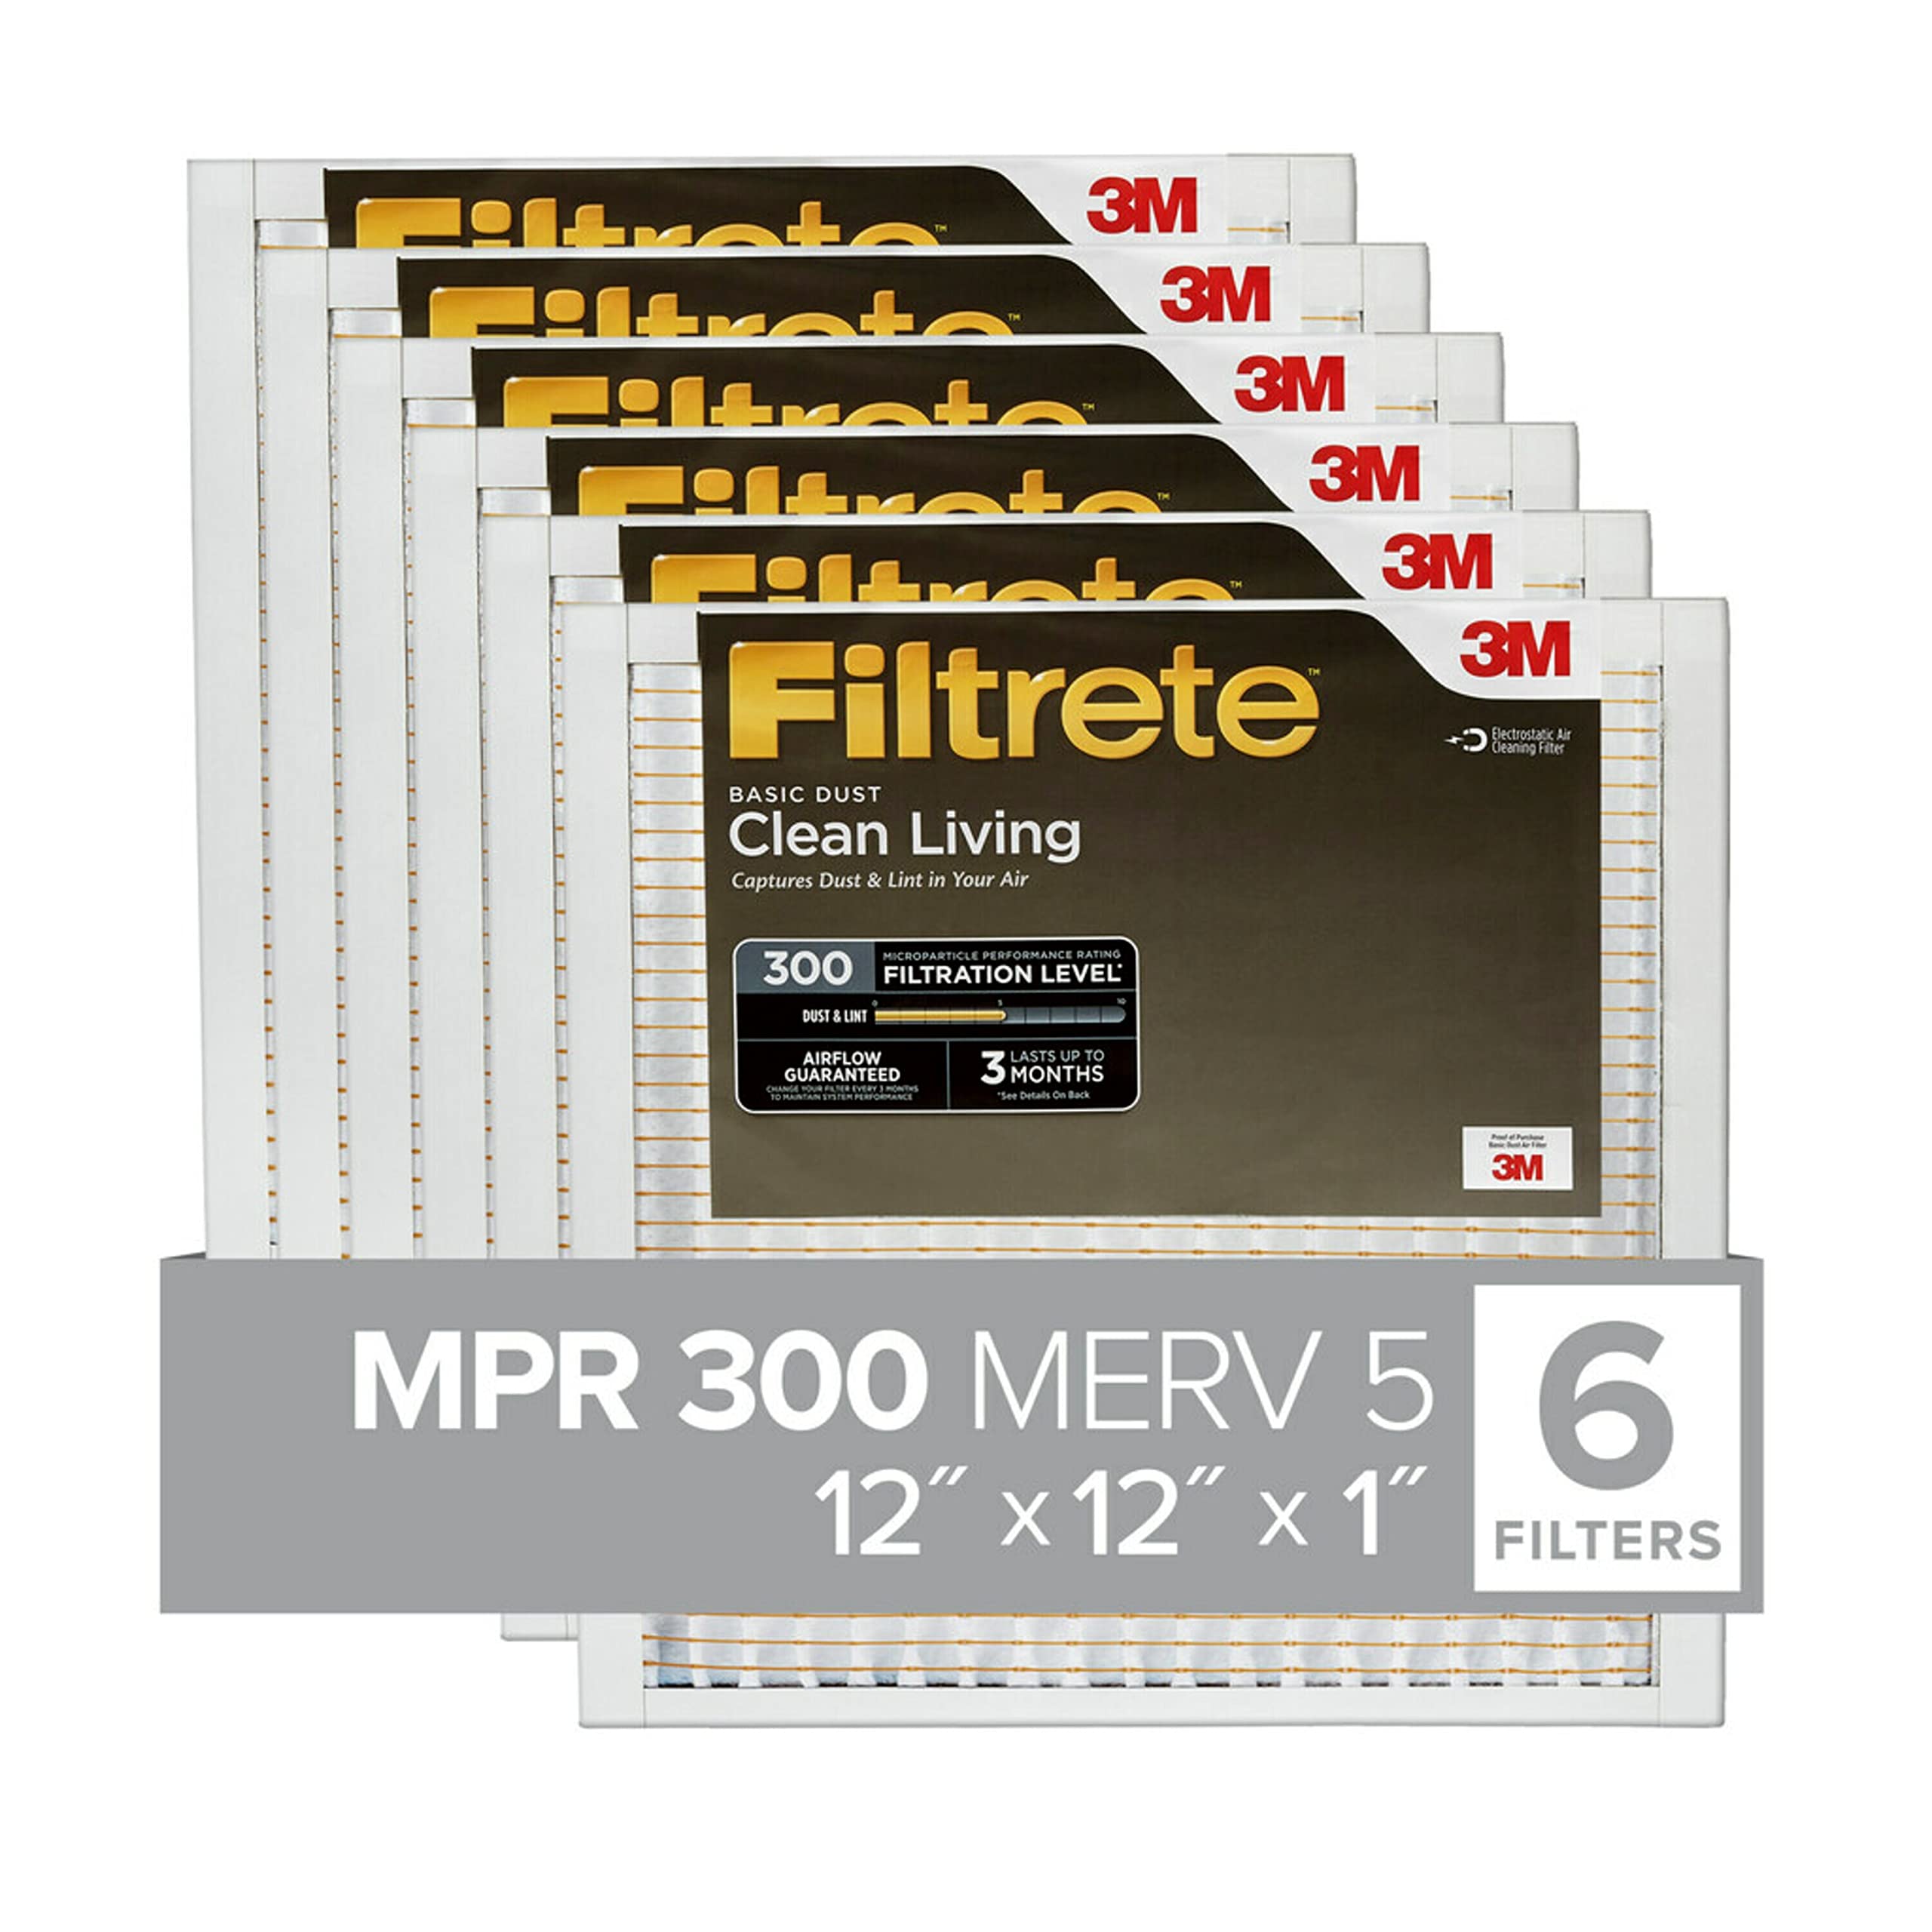 Book Cover Filtrete 12x12x1 Air Filter, MPR 300, MERV 5, Clean Living Basic Dust 3-Month Pleated 1-Inch Air Filters, 6 Filters 12x12x1 White